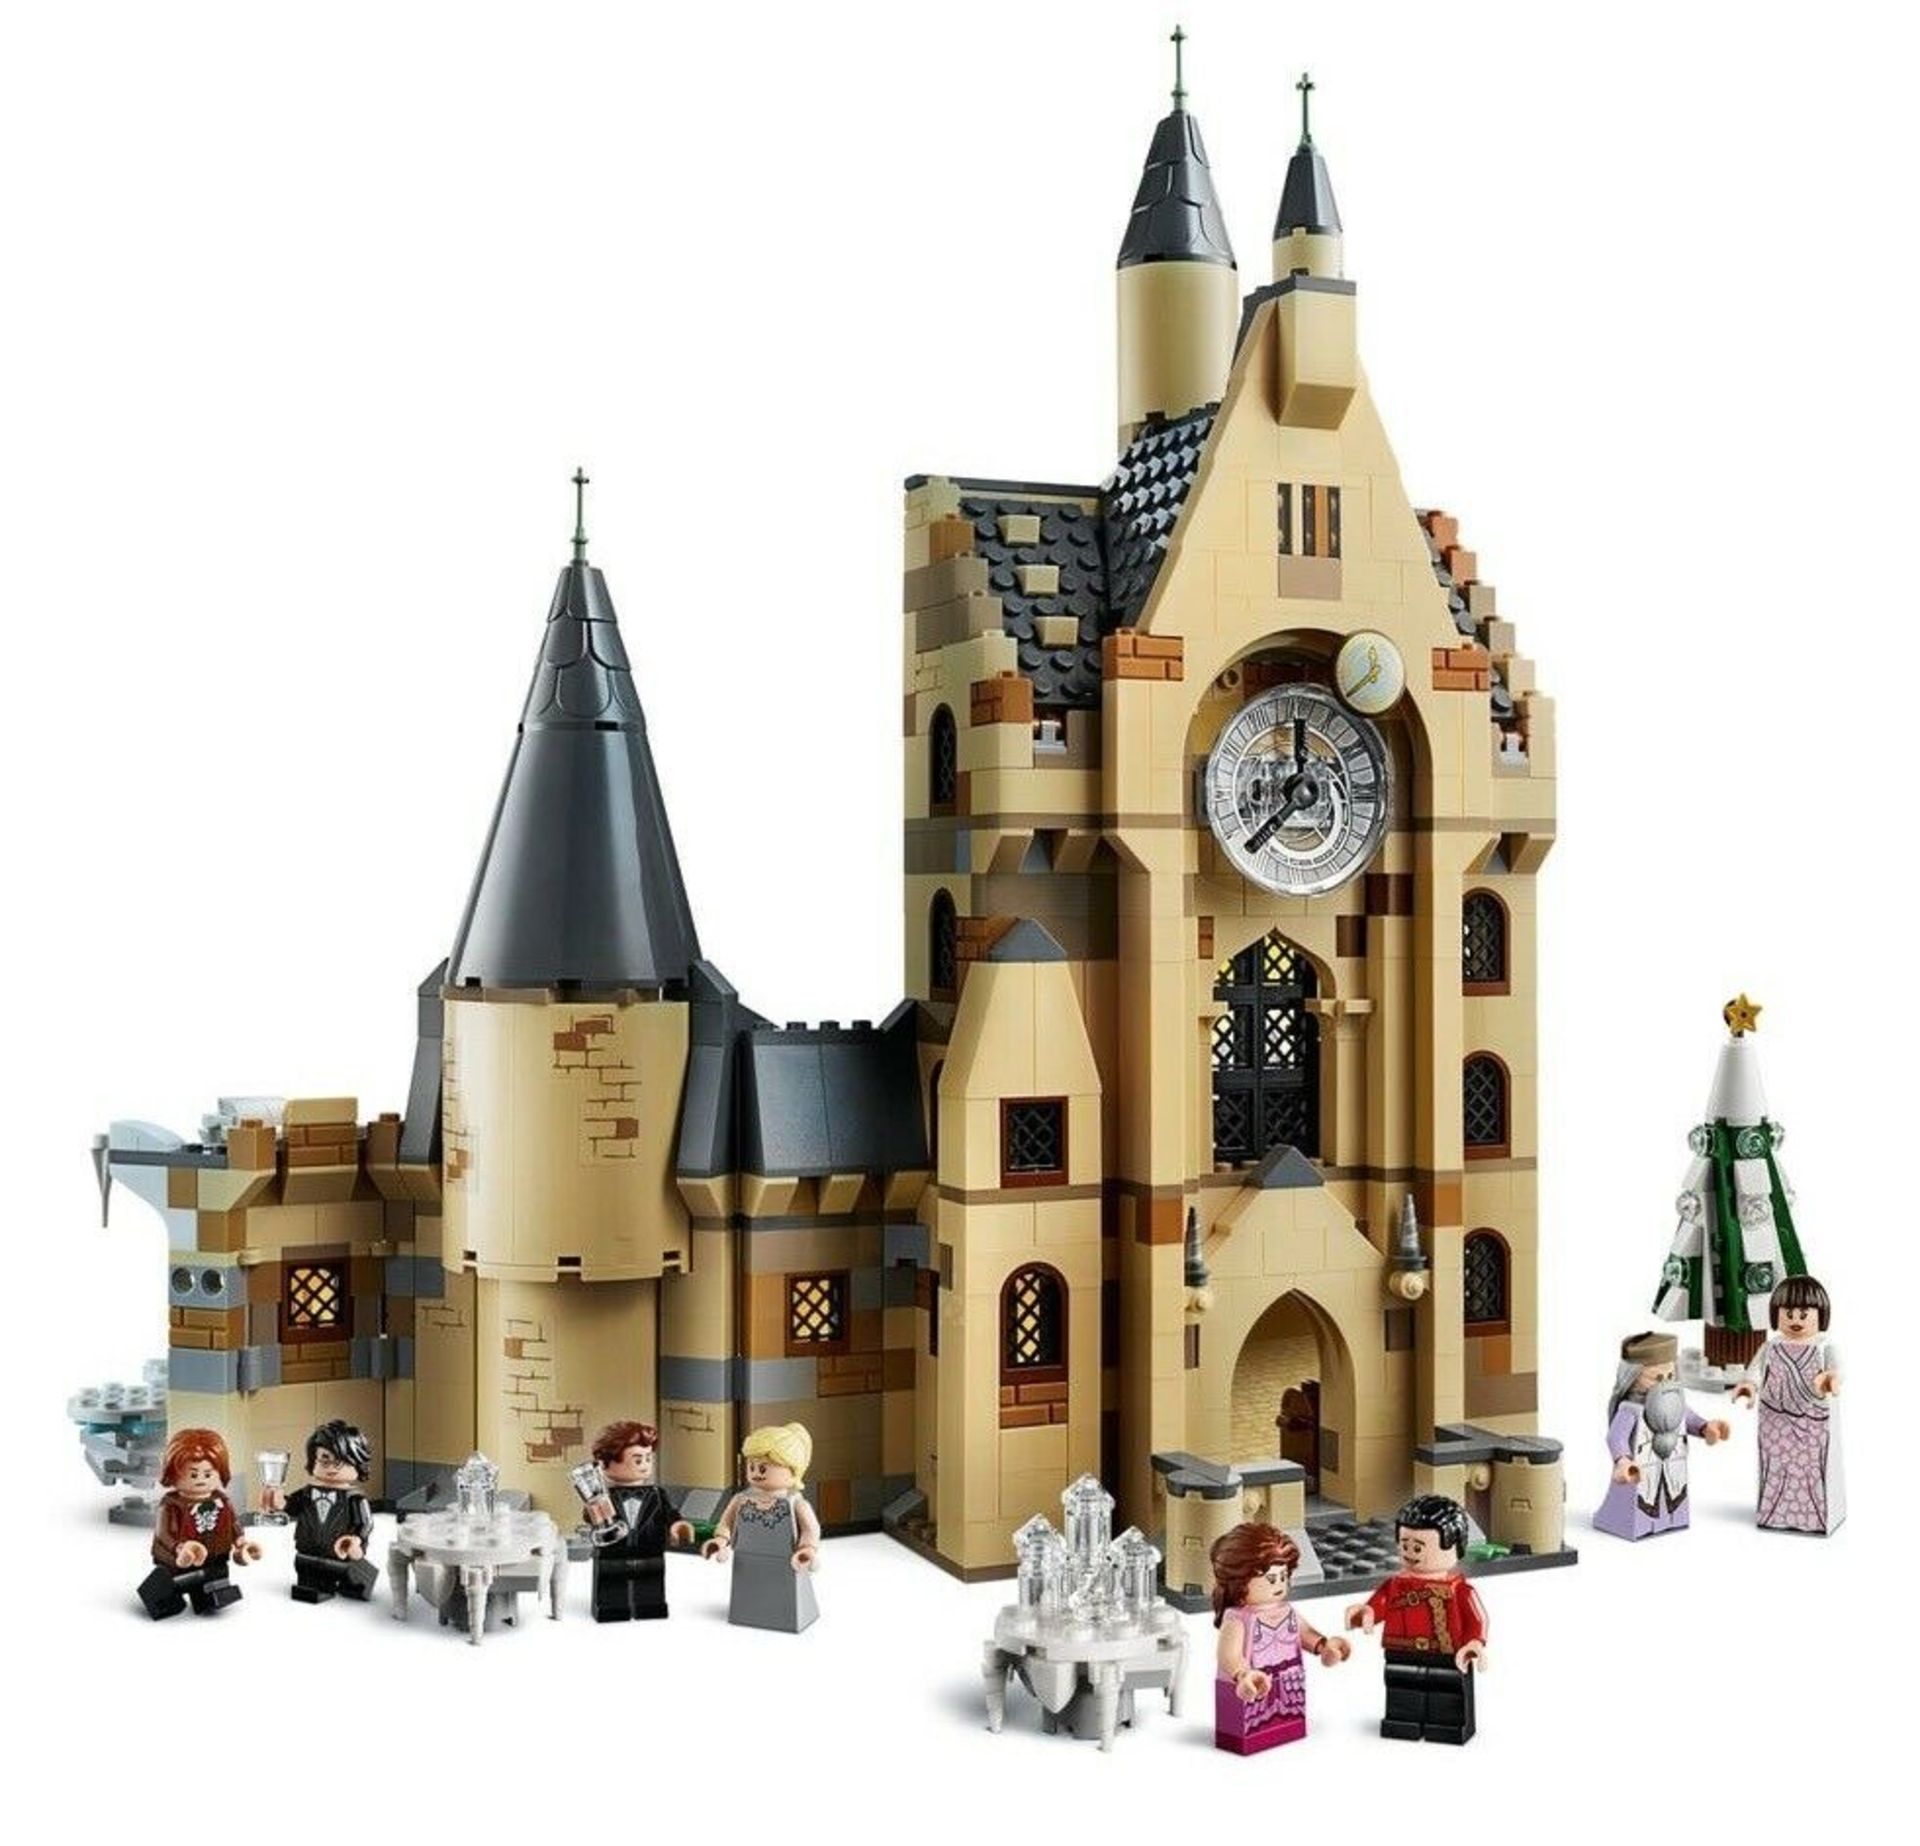 1 x Lego Harry Potter Hogwarts Clock Tower 75948 Lego Playset - Boxed and Sealed - CL007 - Location: